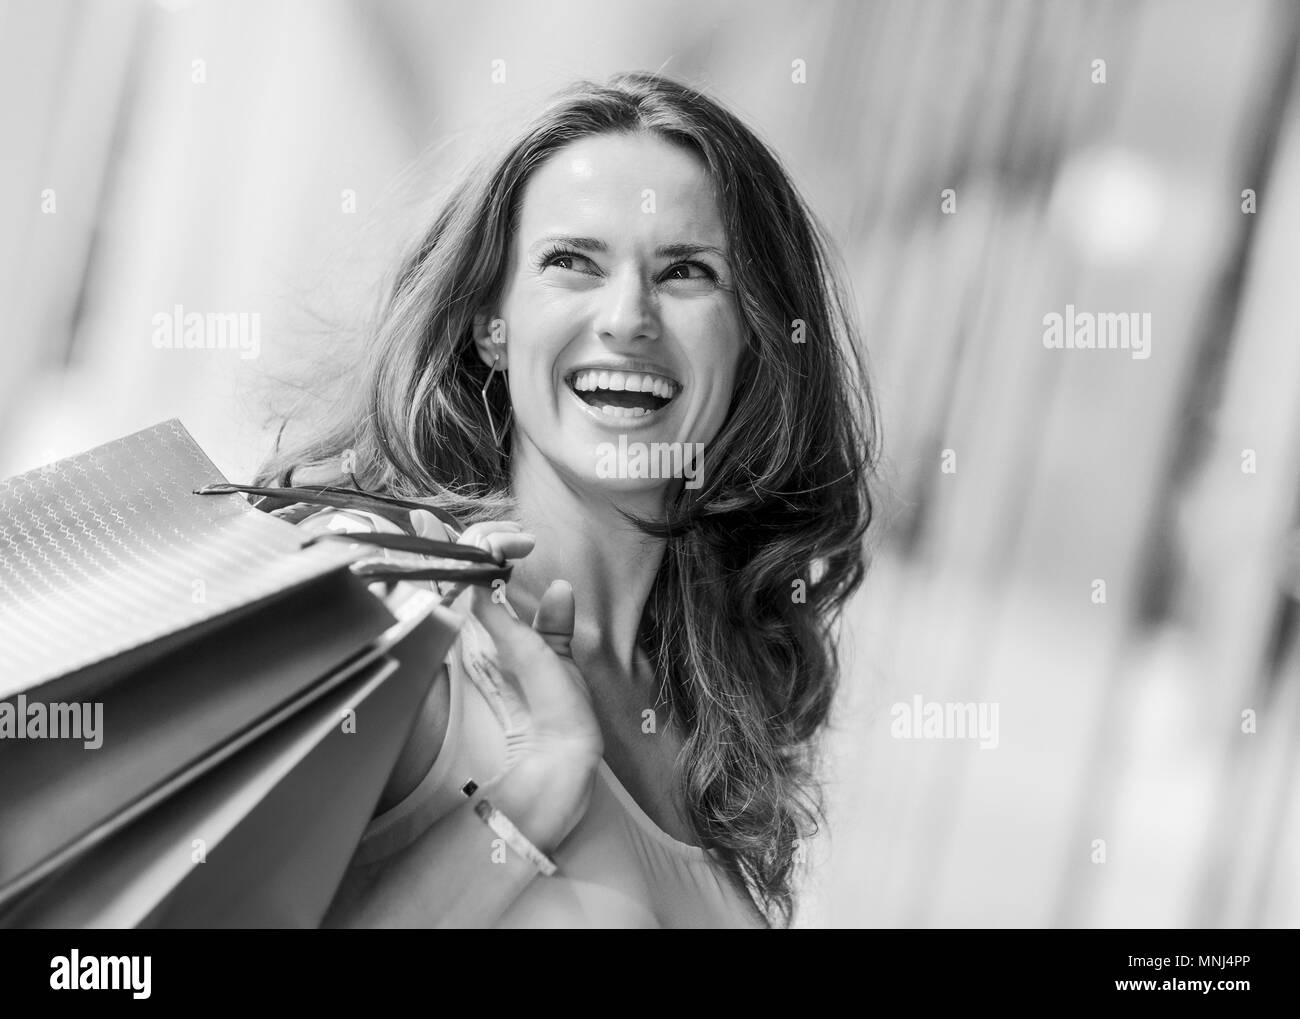 A brown-haired woman holding three shopping bags - brown, gold, and - over her right shoulder looks back at someone who is making her laugh. A good sh Stock Photo